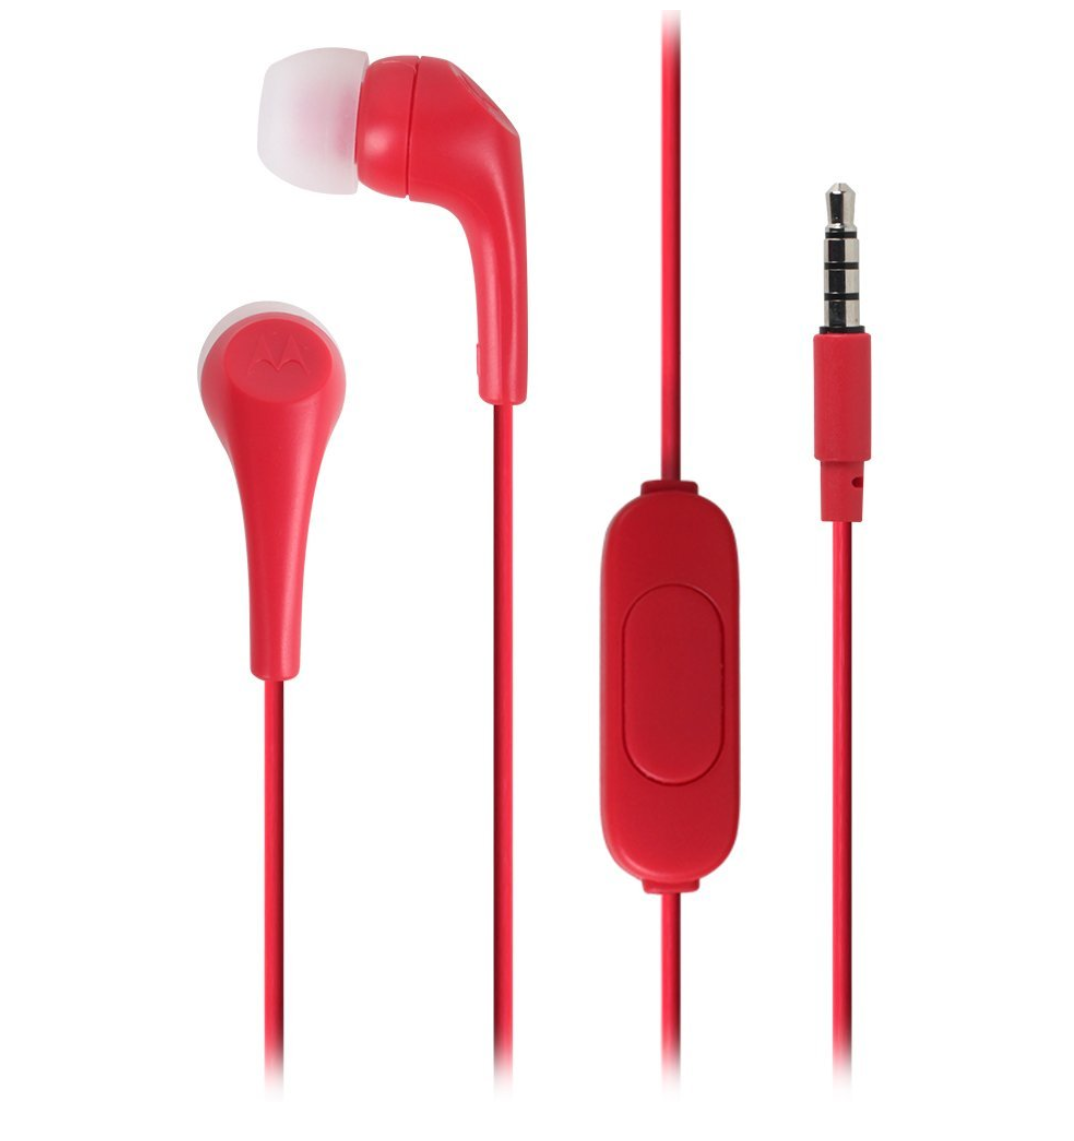 Amazon: Buy Motorola Earbuds 2 In Ear Wired Earphones (Red) at Rs 299 only